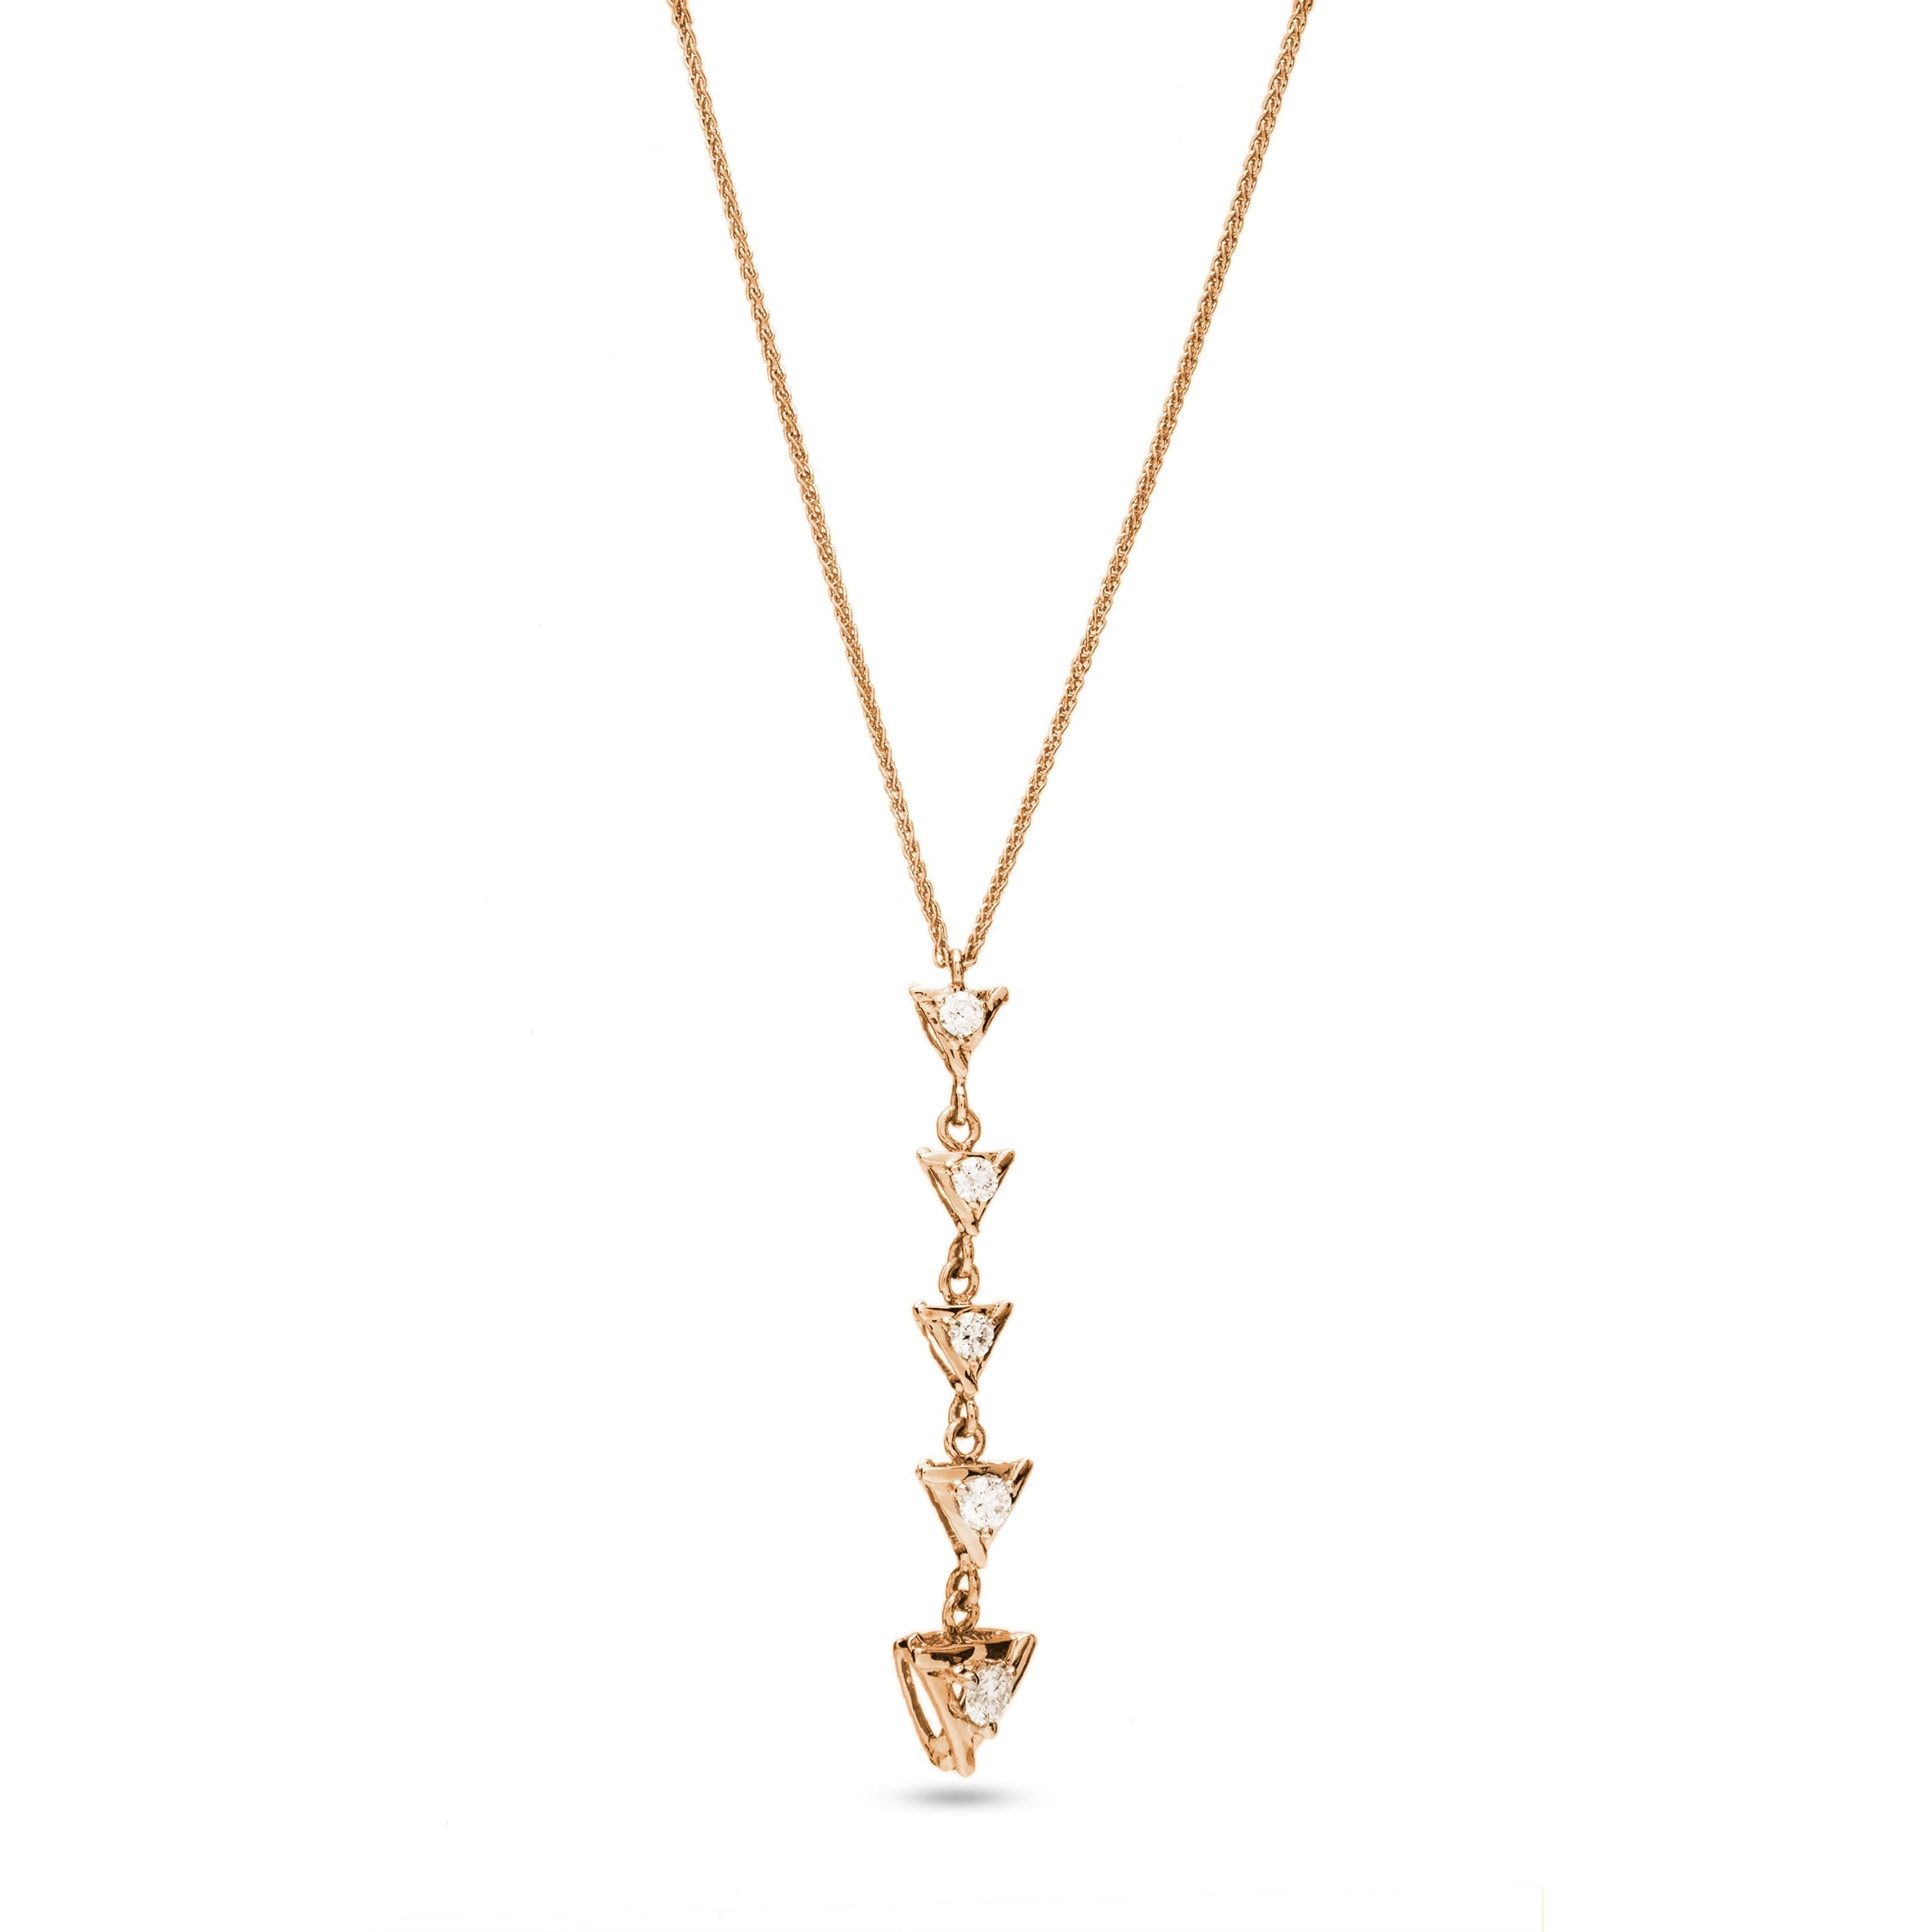 Dangling Diamond Triangles Necklace in 18K Yellow gold - S-H12N